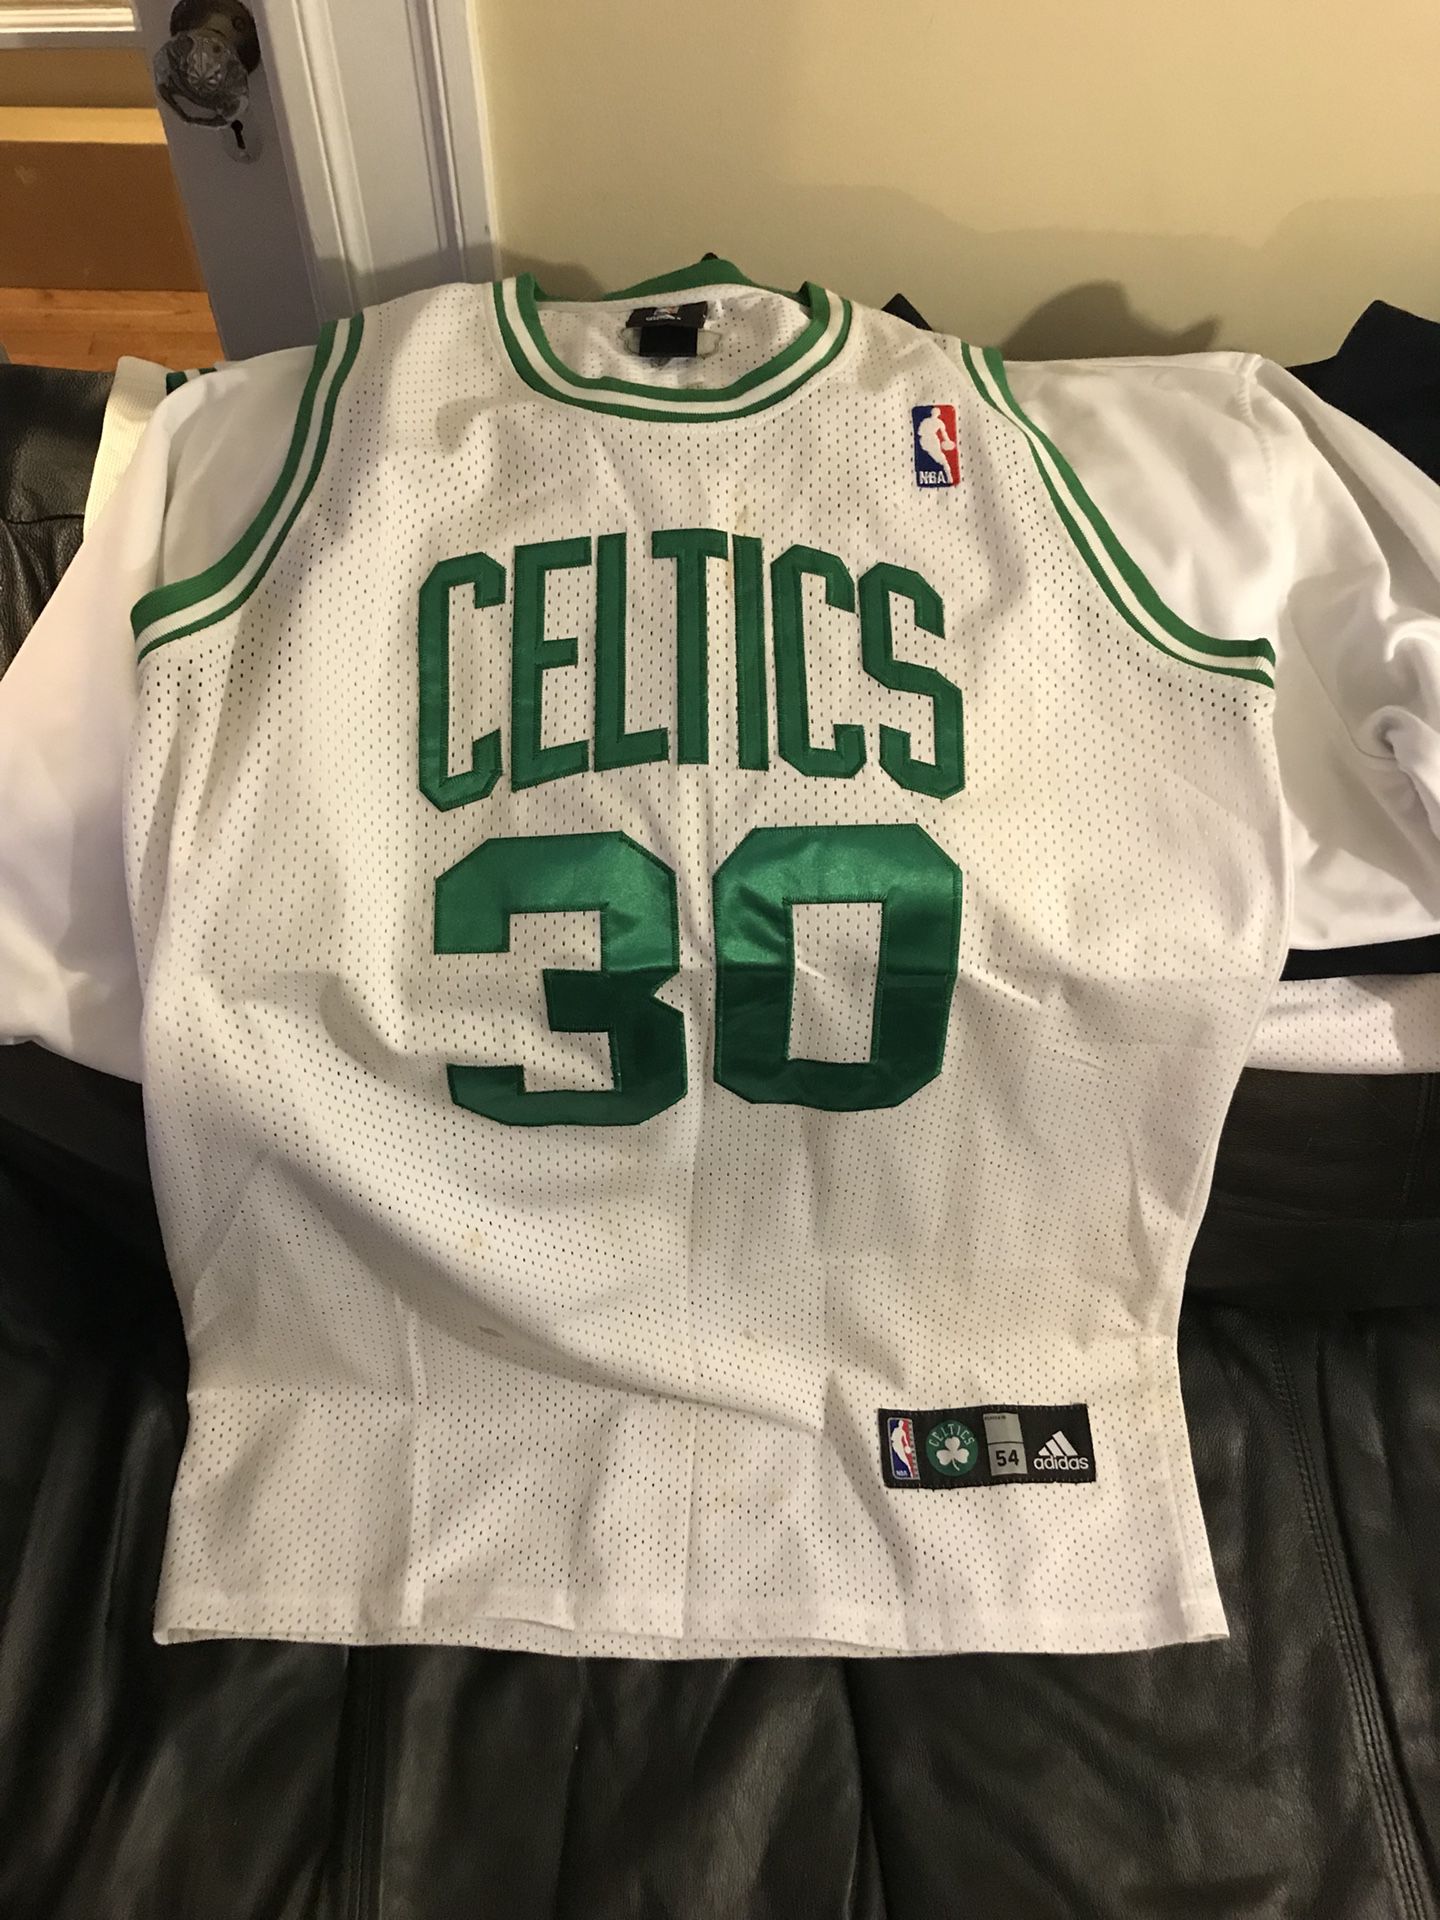 Boston Celtics Rasheed Wallace size 52 men’s jersey authentic White yours for 100.00